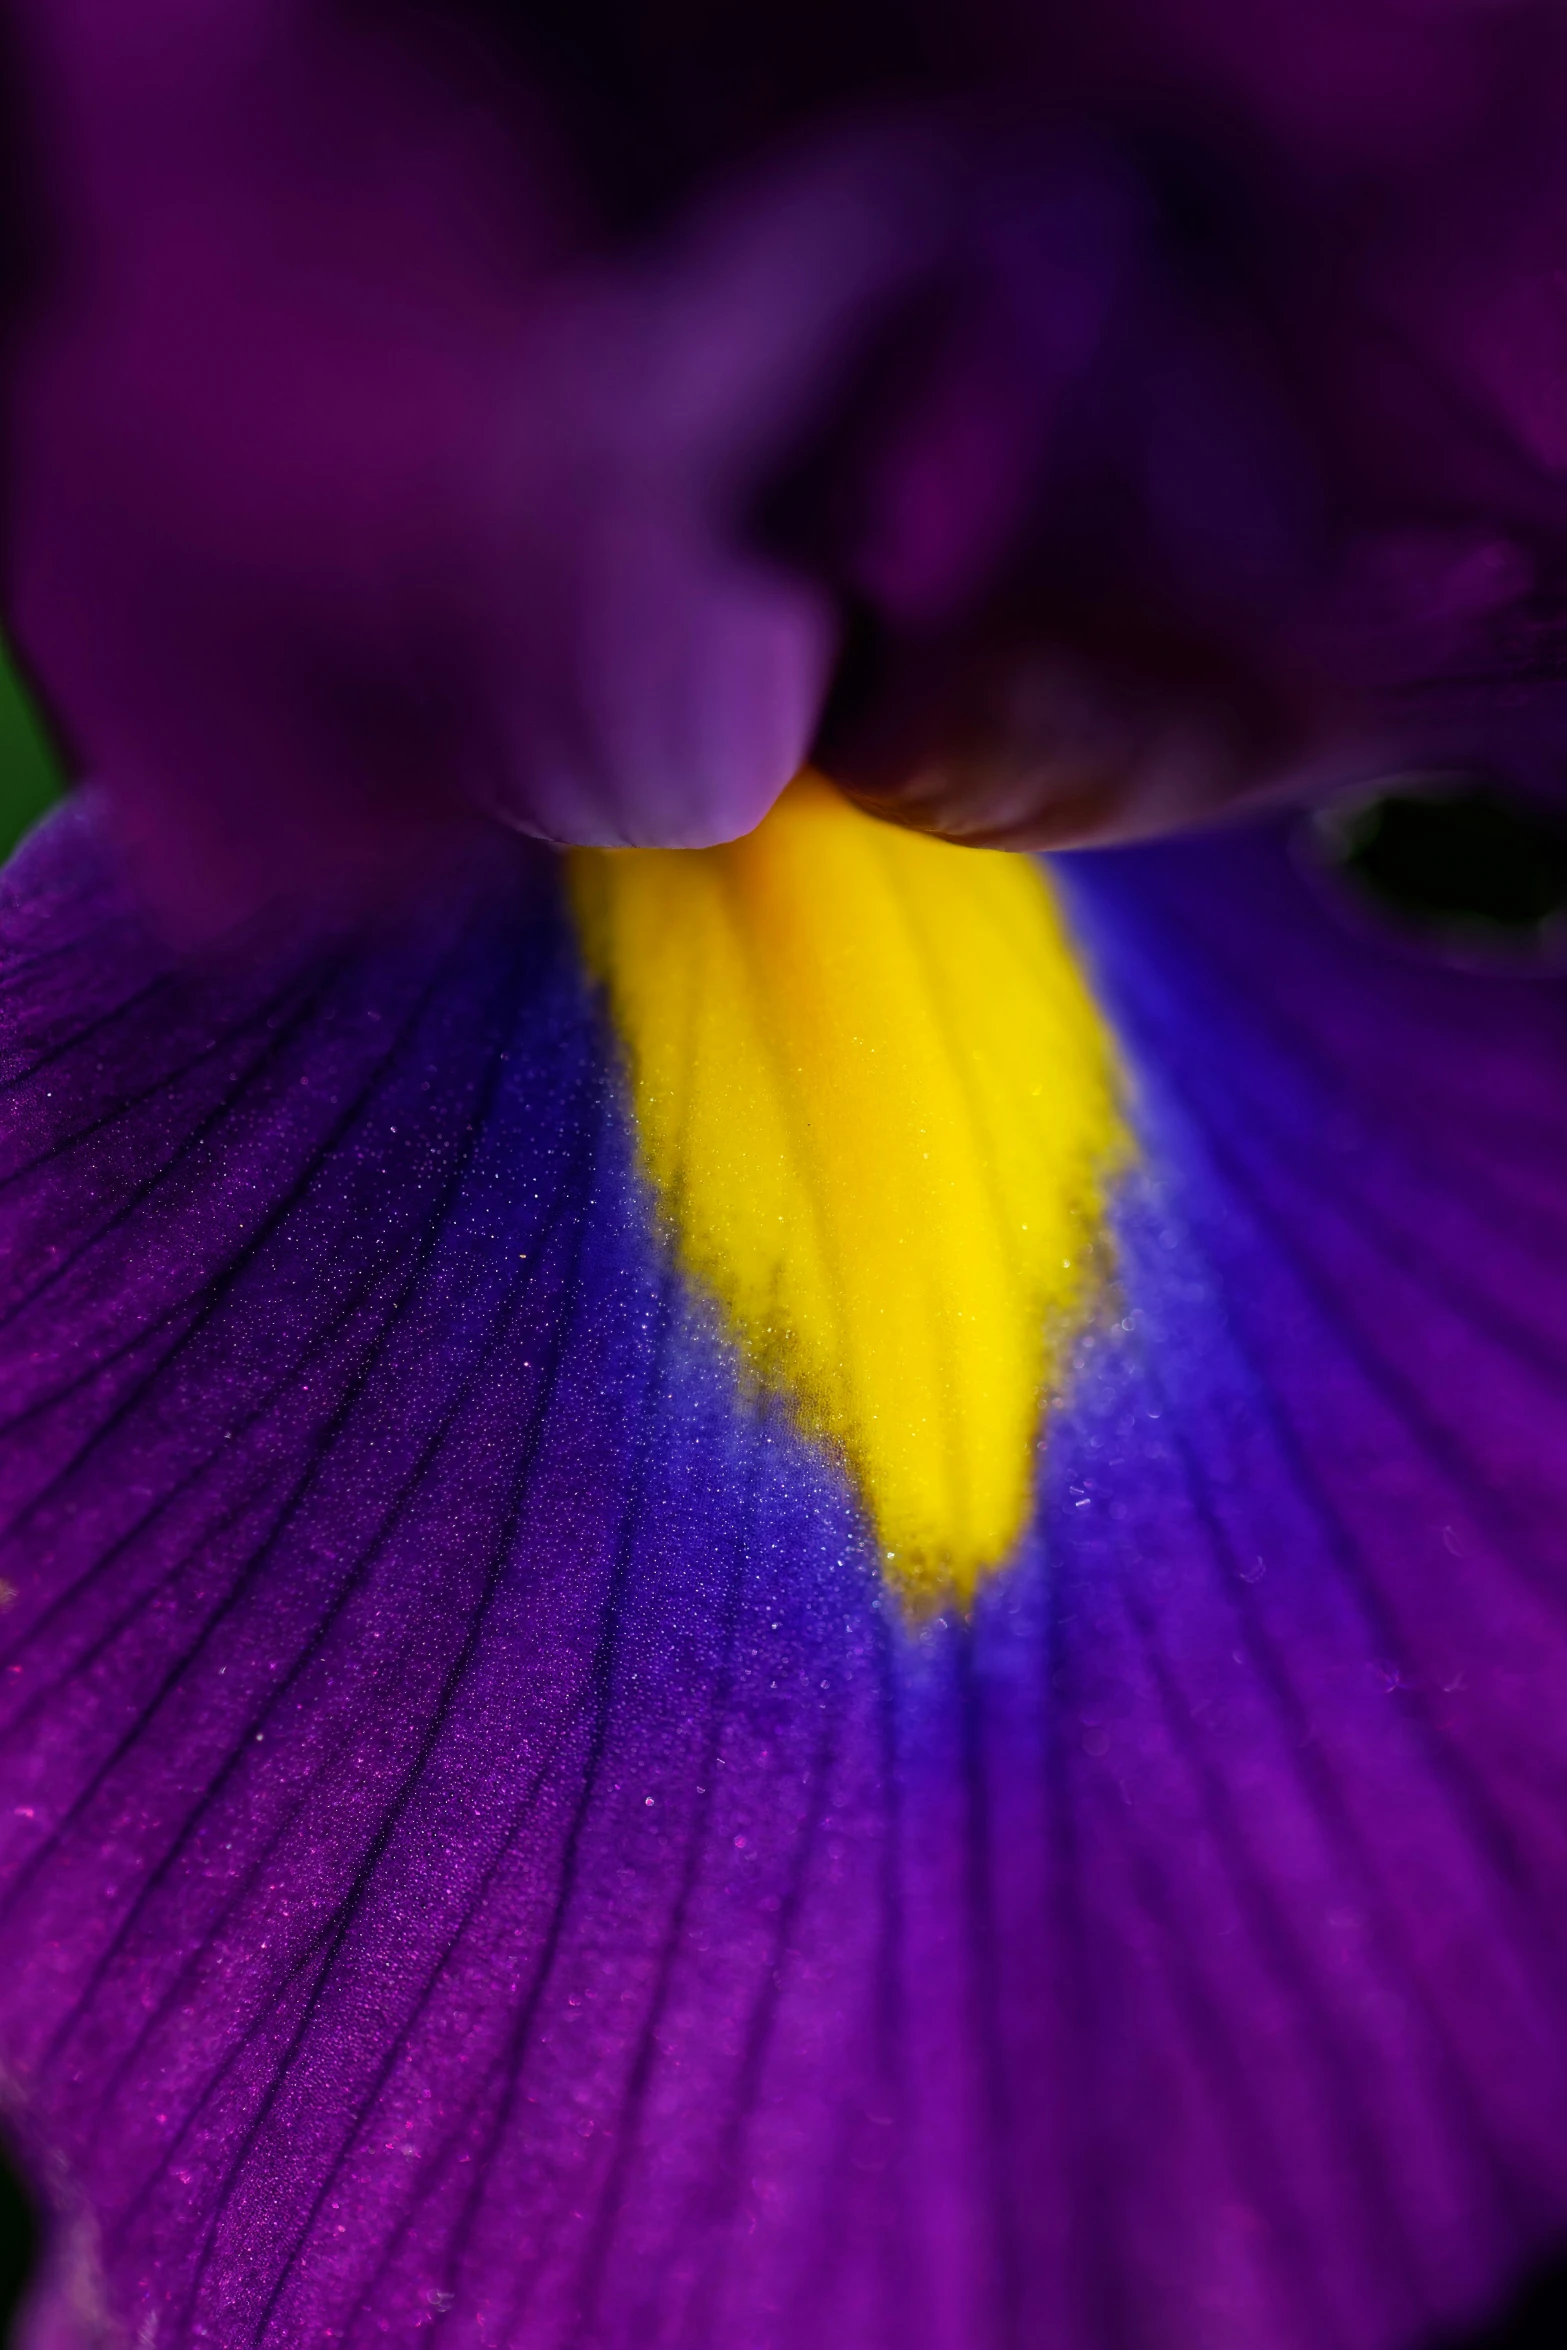 this is a large, purple flower with yellow in the center